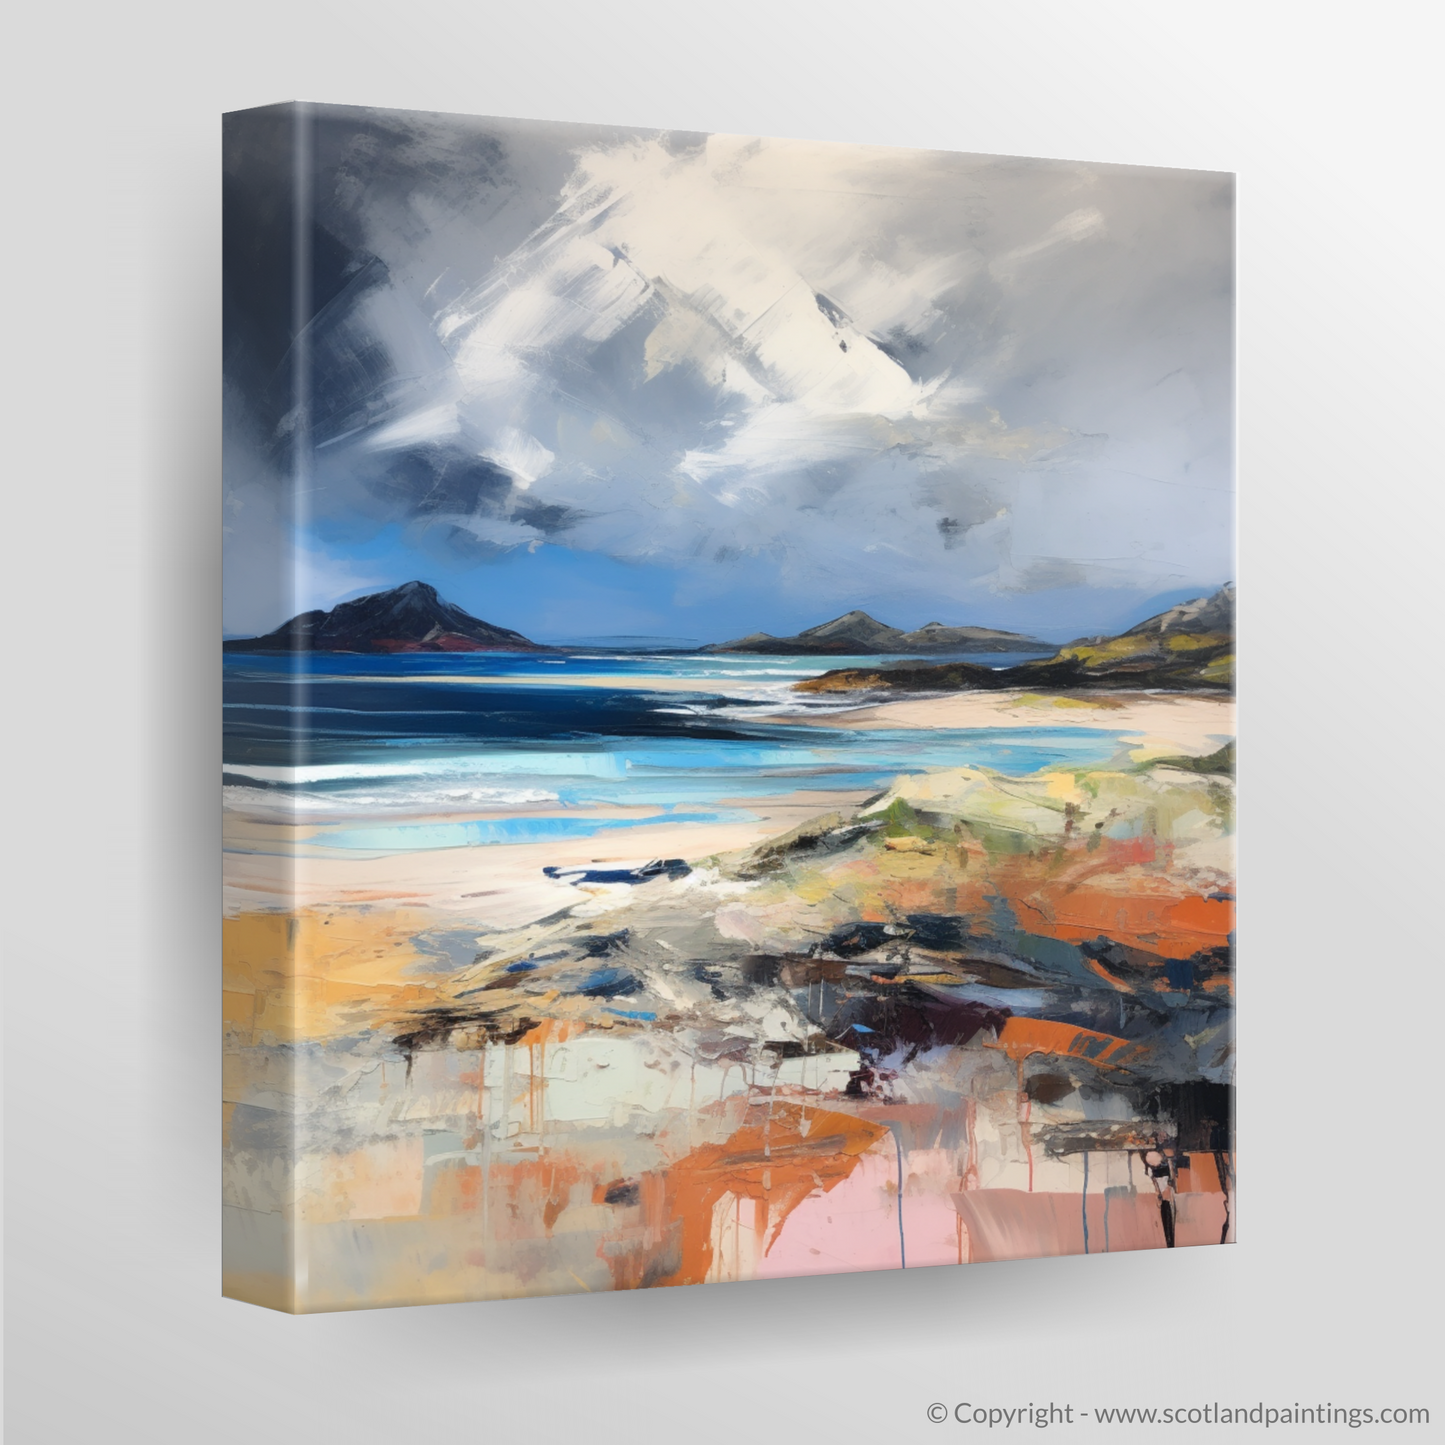 Tempest at Arisaig: An Abstract Expressionist Ode to Scotland's Rugged Coast